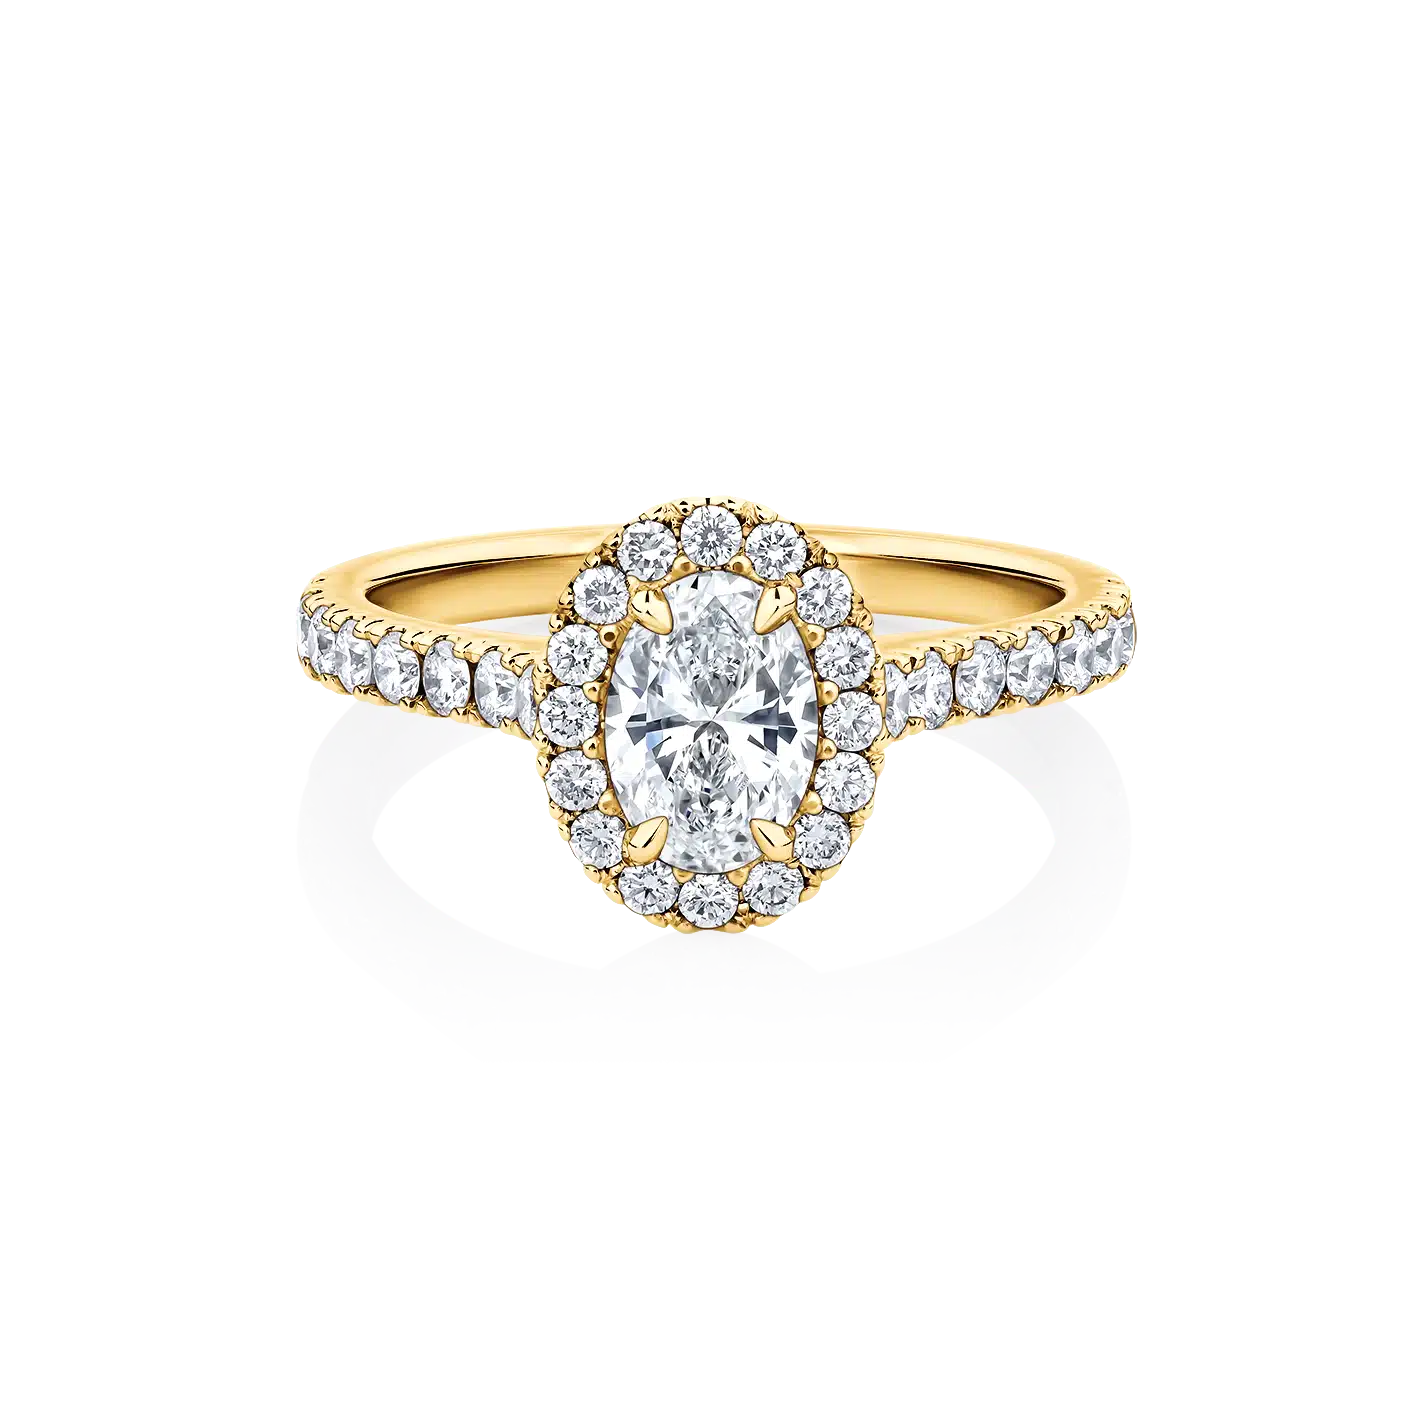 Wattle-Oval-Yellow-Gold-Halo-Oval-Diamond-Engagement-Ring